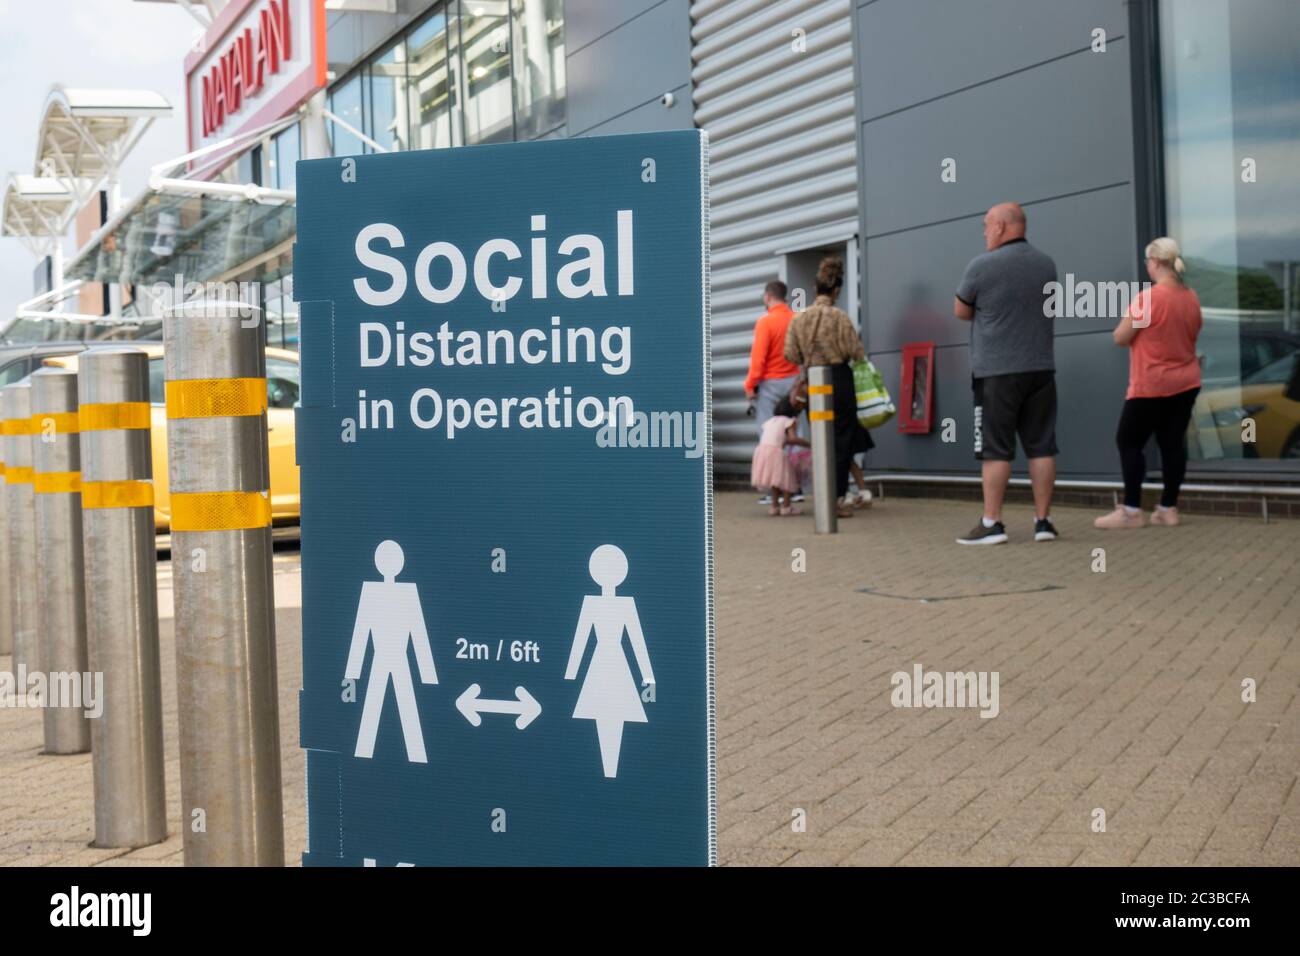 Edinburgh, Scotland, UK. 19 June, 2020. Several shops at Straiton Retail Park outside Edinburgh have opened. Signage warning customers to maintain 2m social distancing is positioned outside and inside shops. Iain Masterton/Alamy Live News Stock Photo